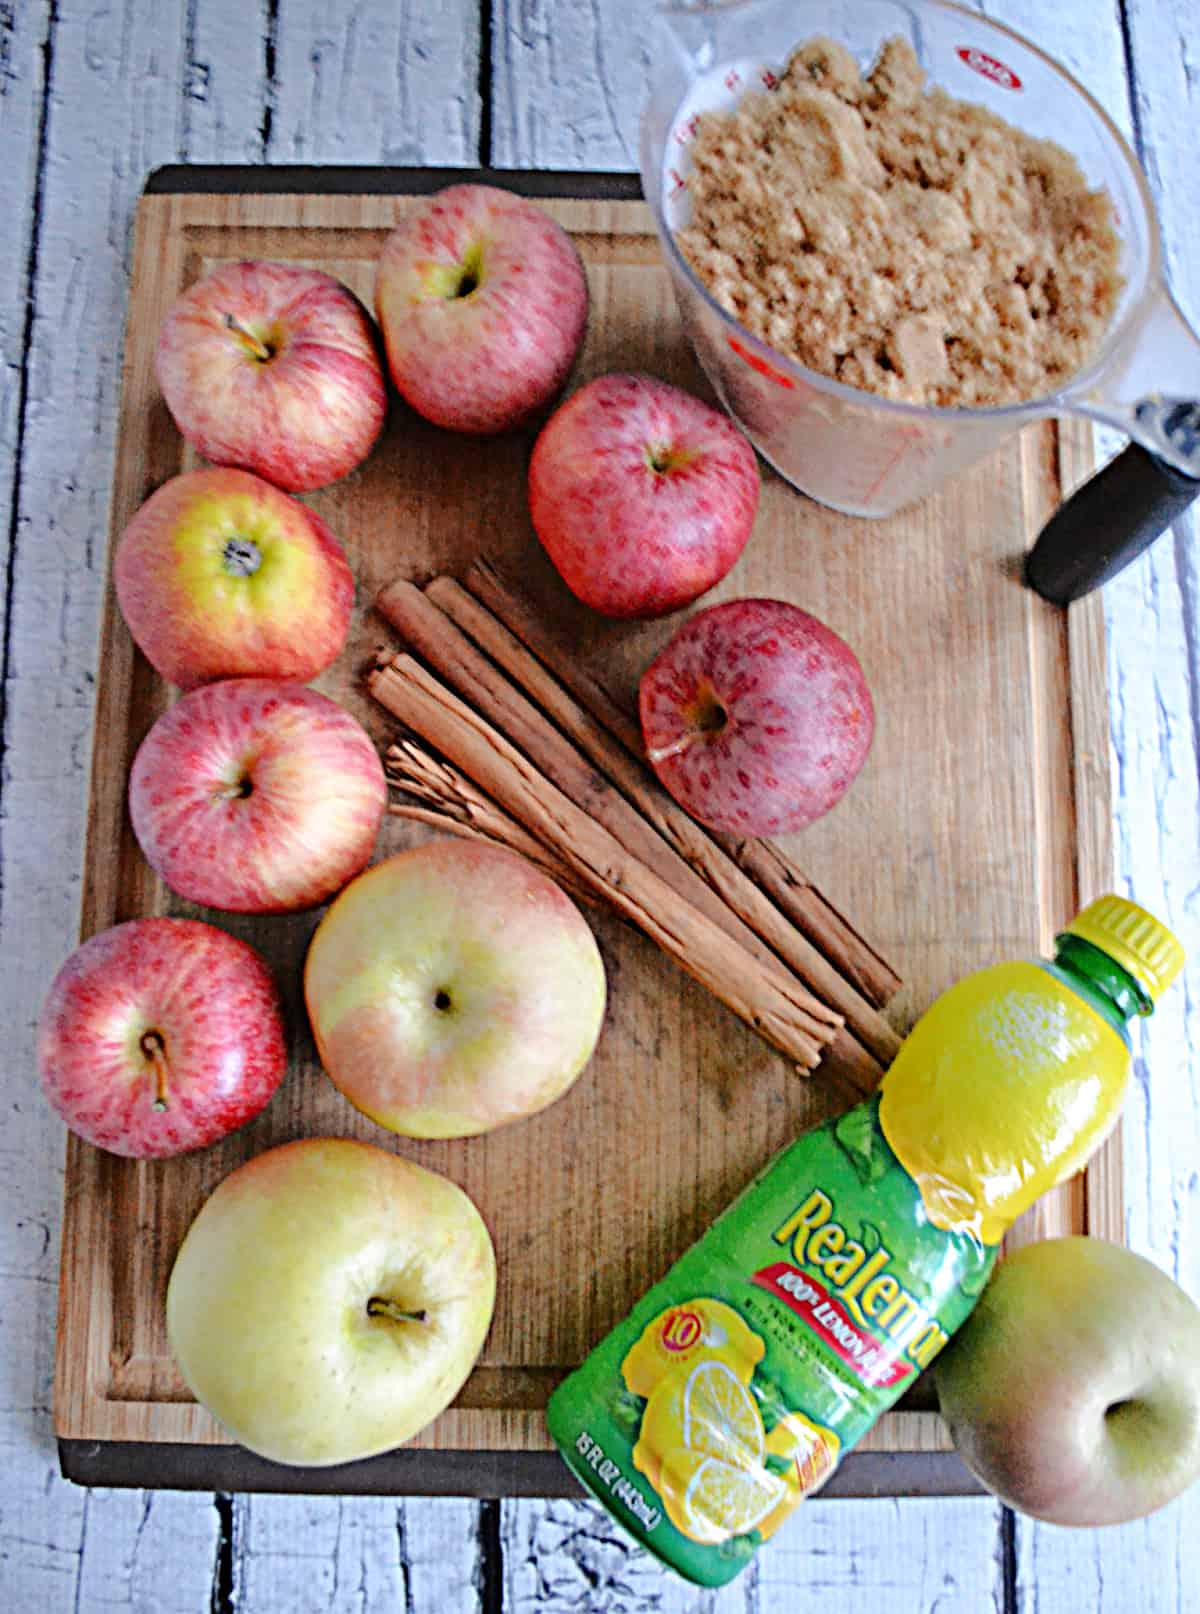 A cutting board with brown sugar, apples, spices, and lemon juice.